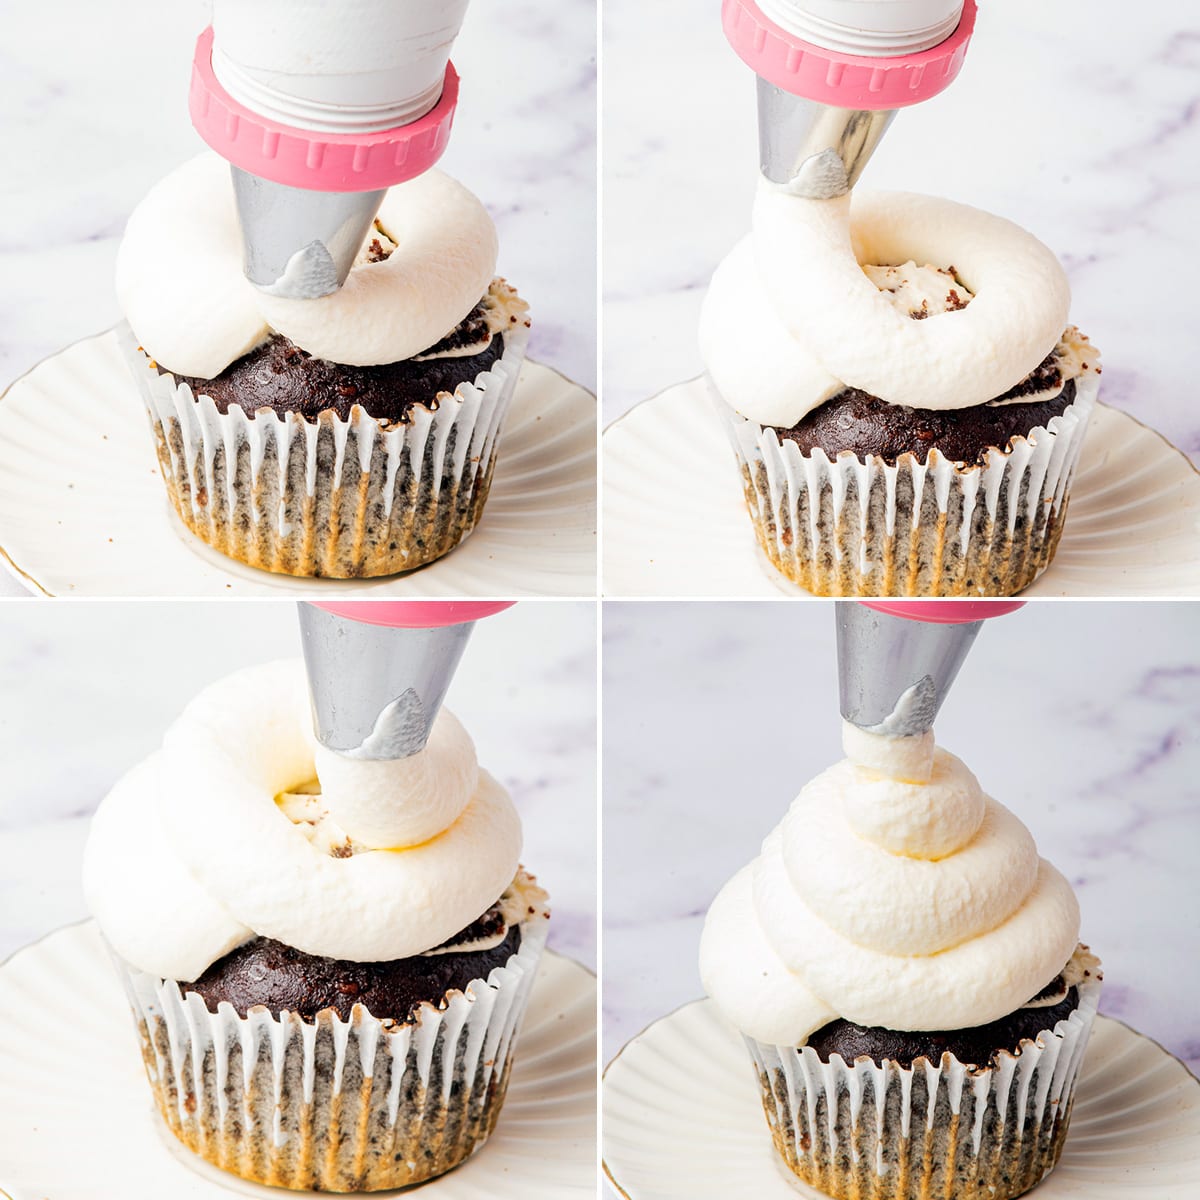 how to pipe cream topping on cupcakes